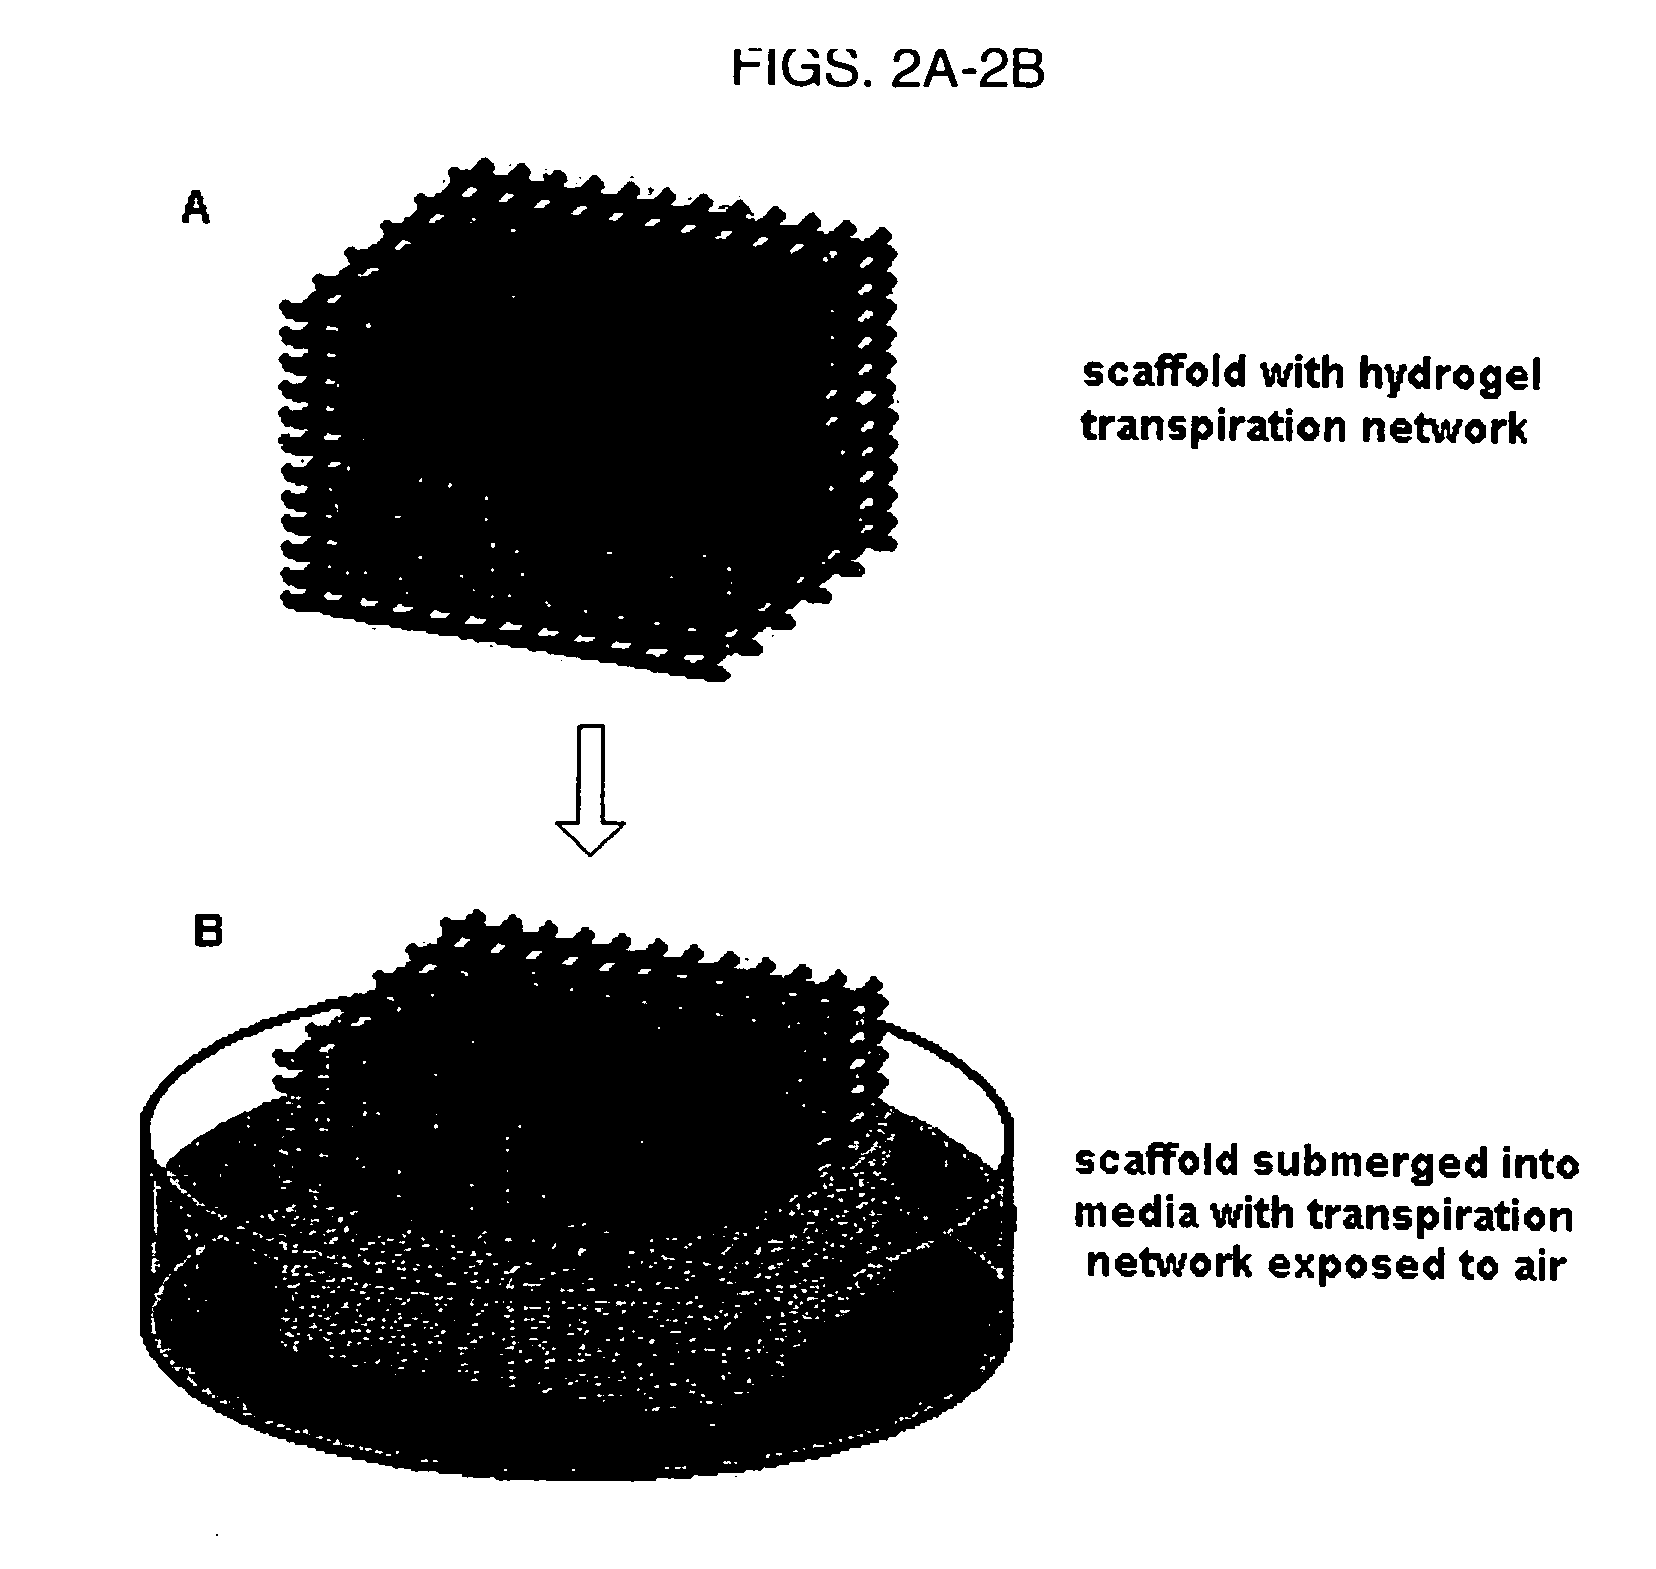 Method for creating an internal transport system within tissue scaffolds using computer-aided tissue engineering